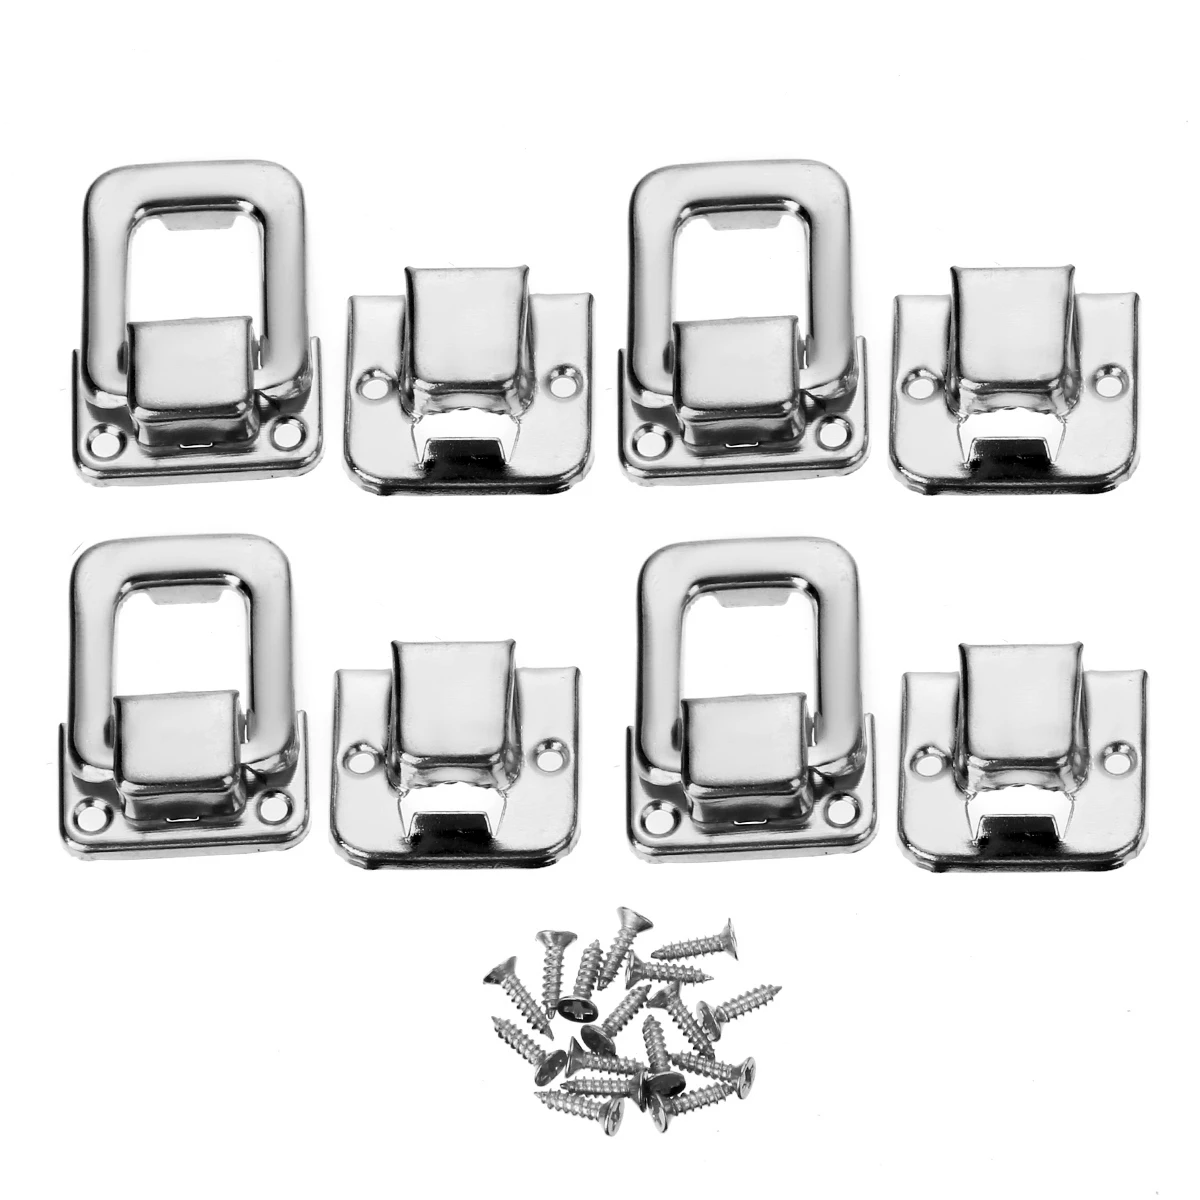 4pcs Silver Fastener Toggle Lock Latch Catch Practical Locks for Suitcase Case Boxes Chests Trunk Tools